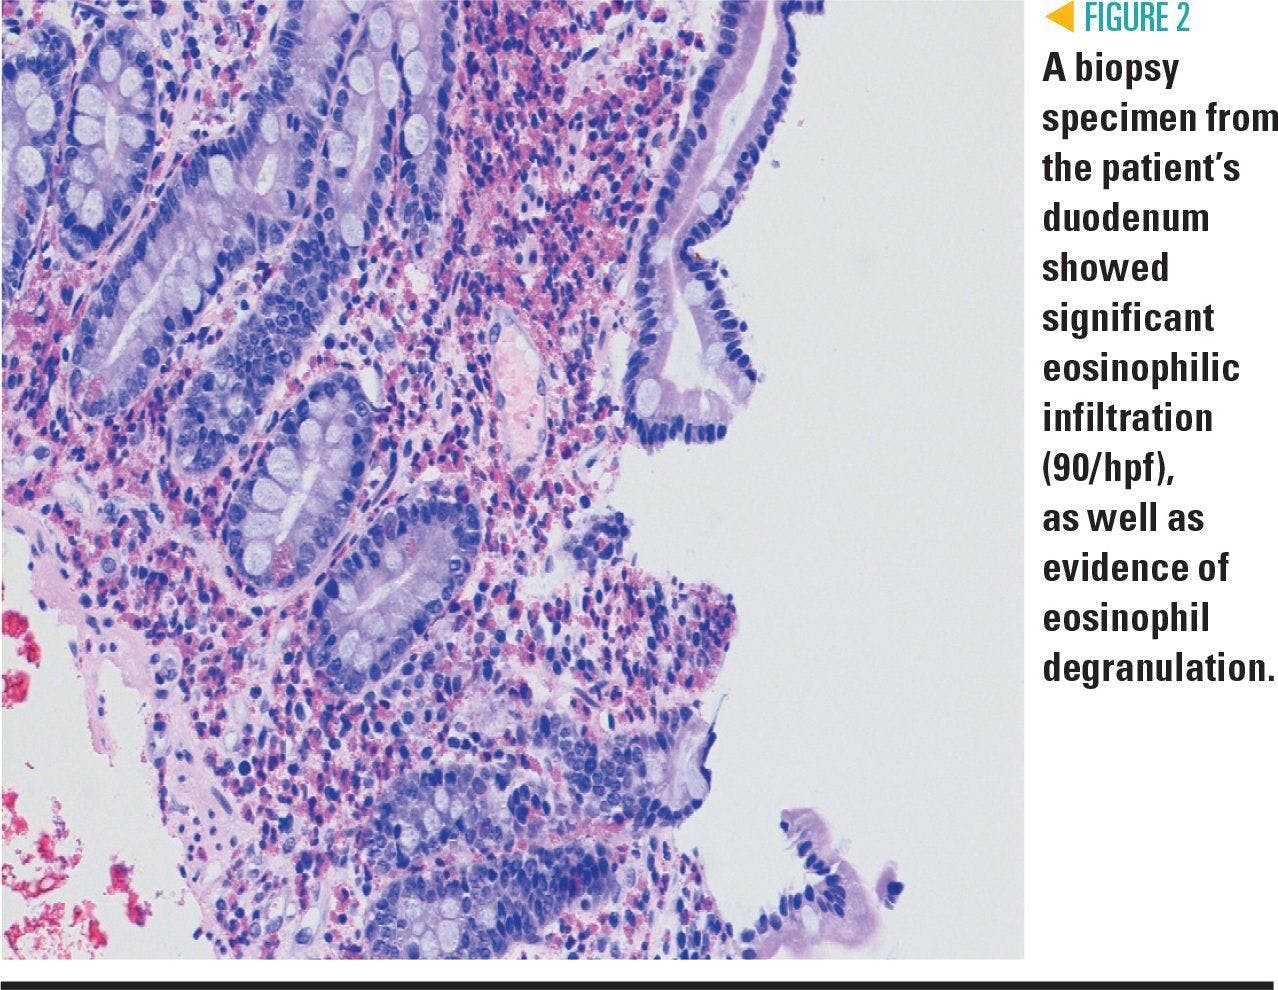 A biopsy of a specimen taken from the patient's duodenum